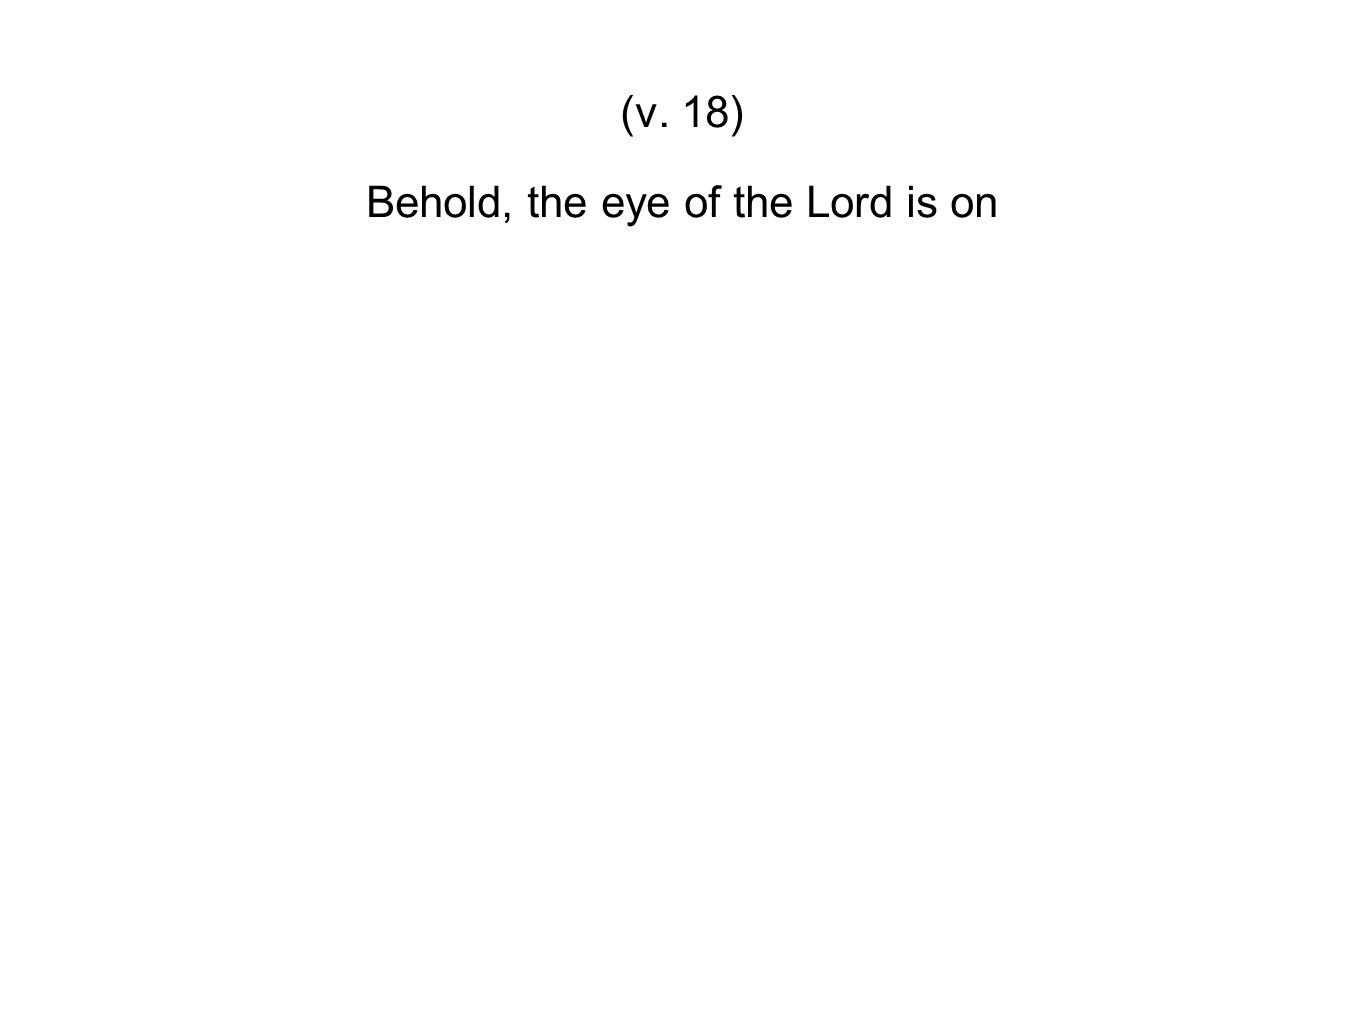 Behold, the eye of the Lord is on